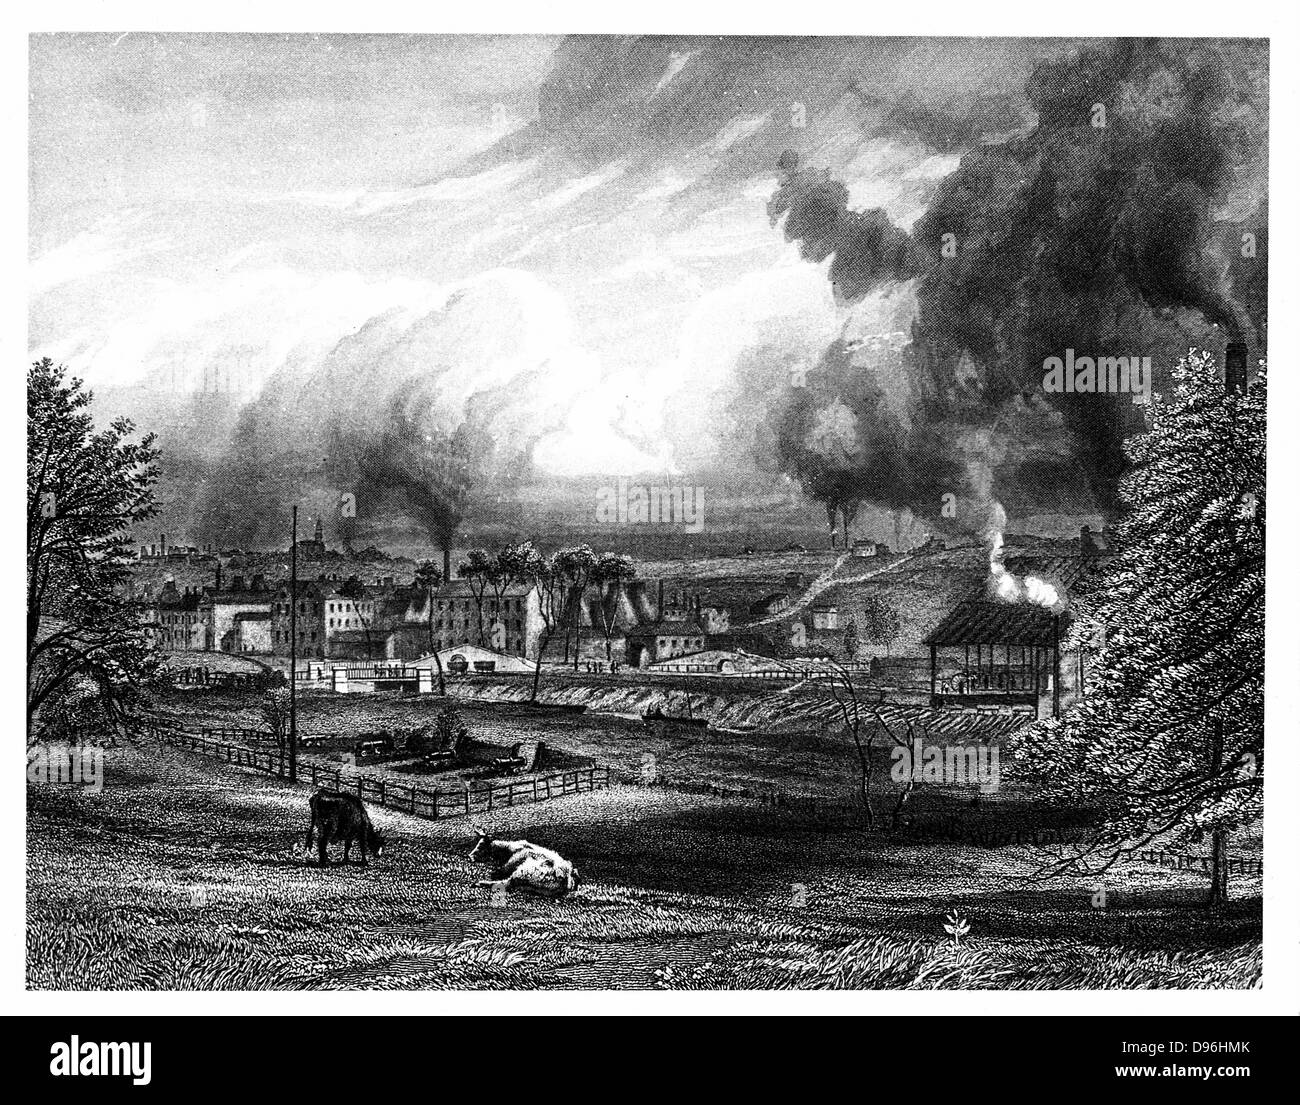 Josiah Wedgwood's (1730-1791) factory, Etruria, Hanley, Staffordshire, England. The Etruria Canal, constructed in order to transport finished wares from the potteries,  is visible below the embankment in the centre of the image. Engraving. Stock Photo